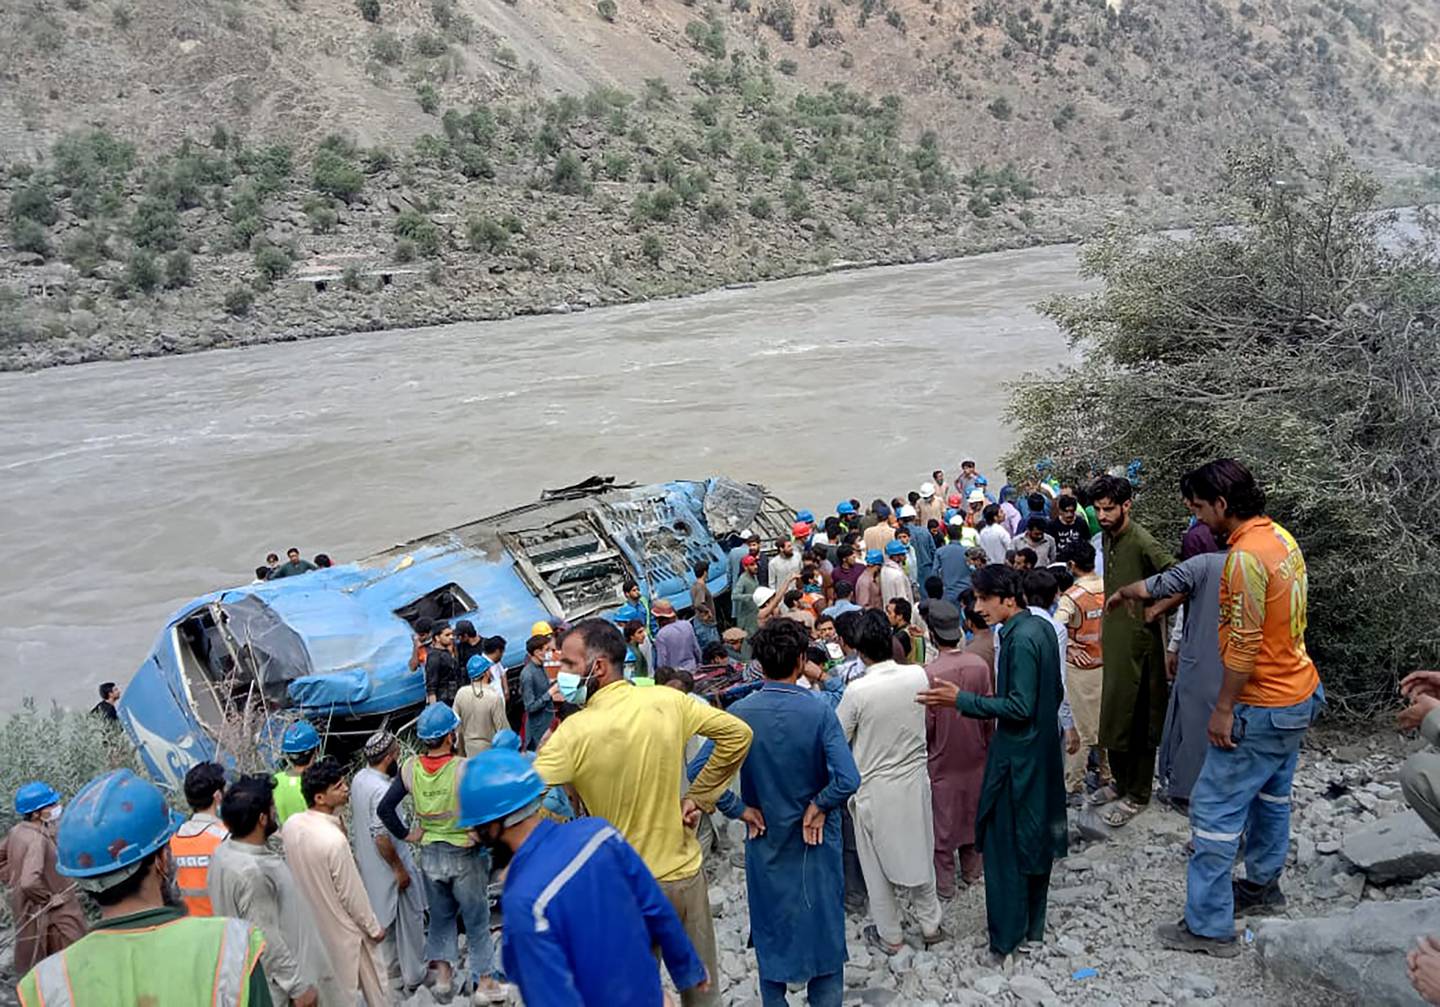 Local residents and rescue workers gather at the site of bus accident, in Kohistan Kohistan district of Pakistan's Khyber Pakhtunkhwa province, Wednesday, July 14, 2021. File photo / AP